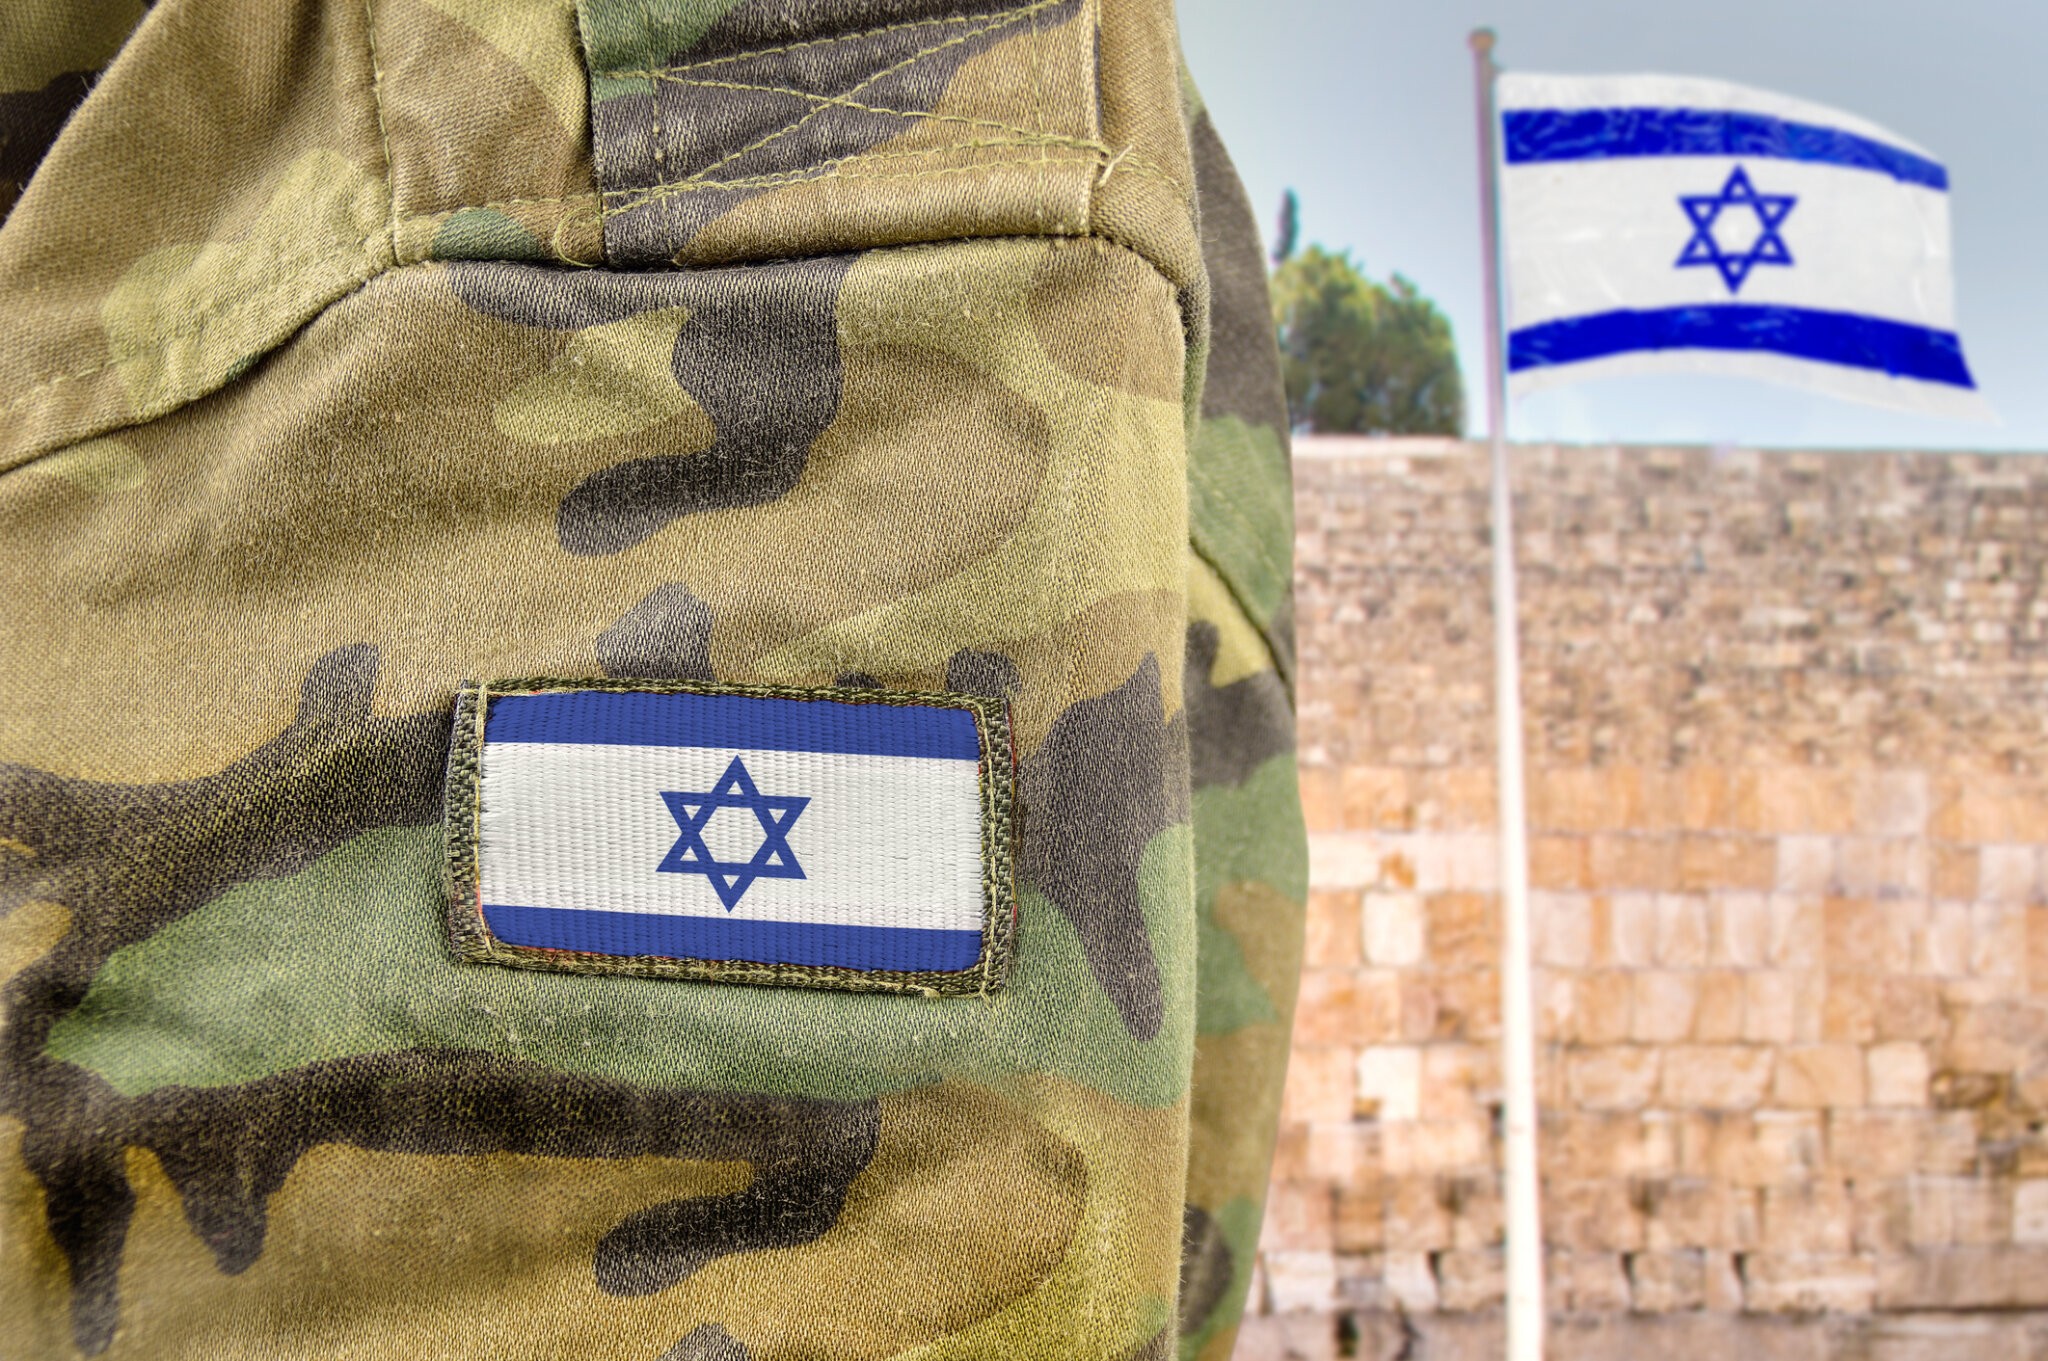 An Israeli solider at The Western Wall